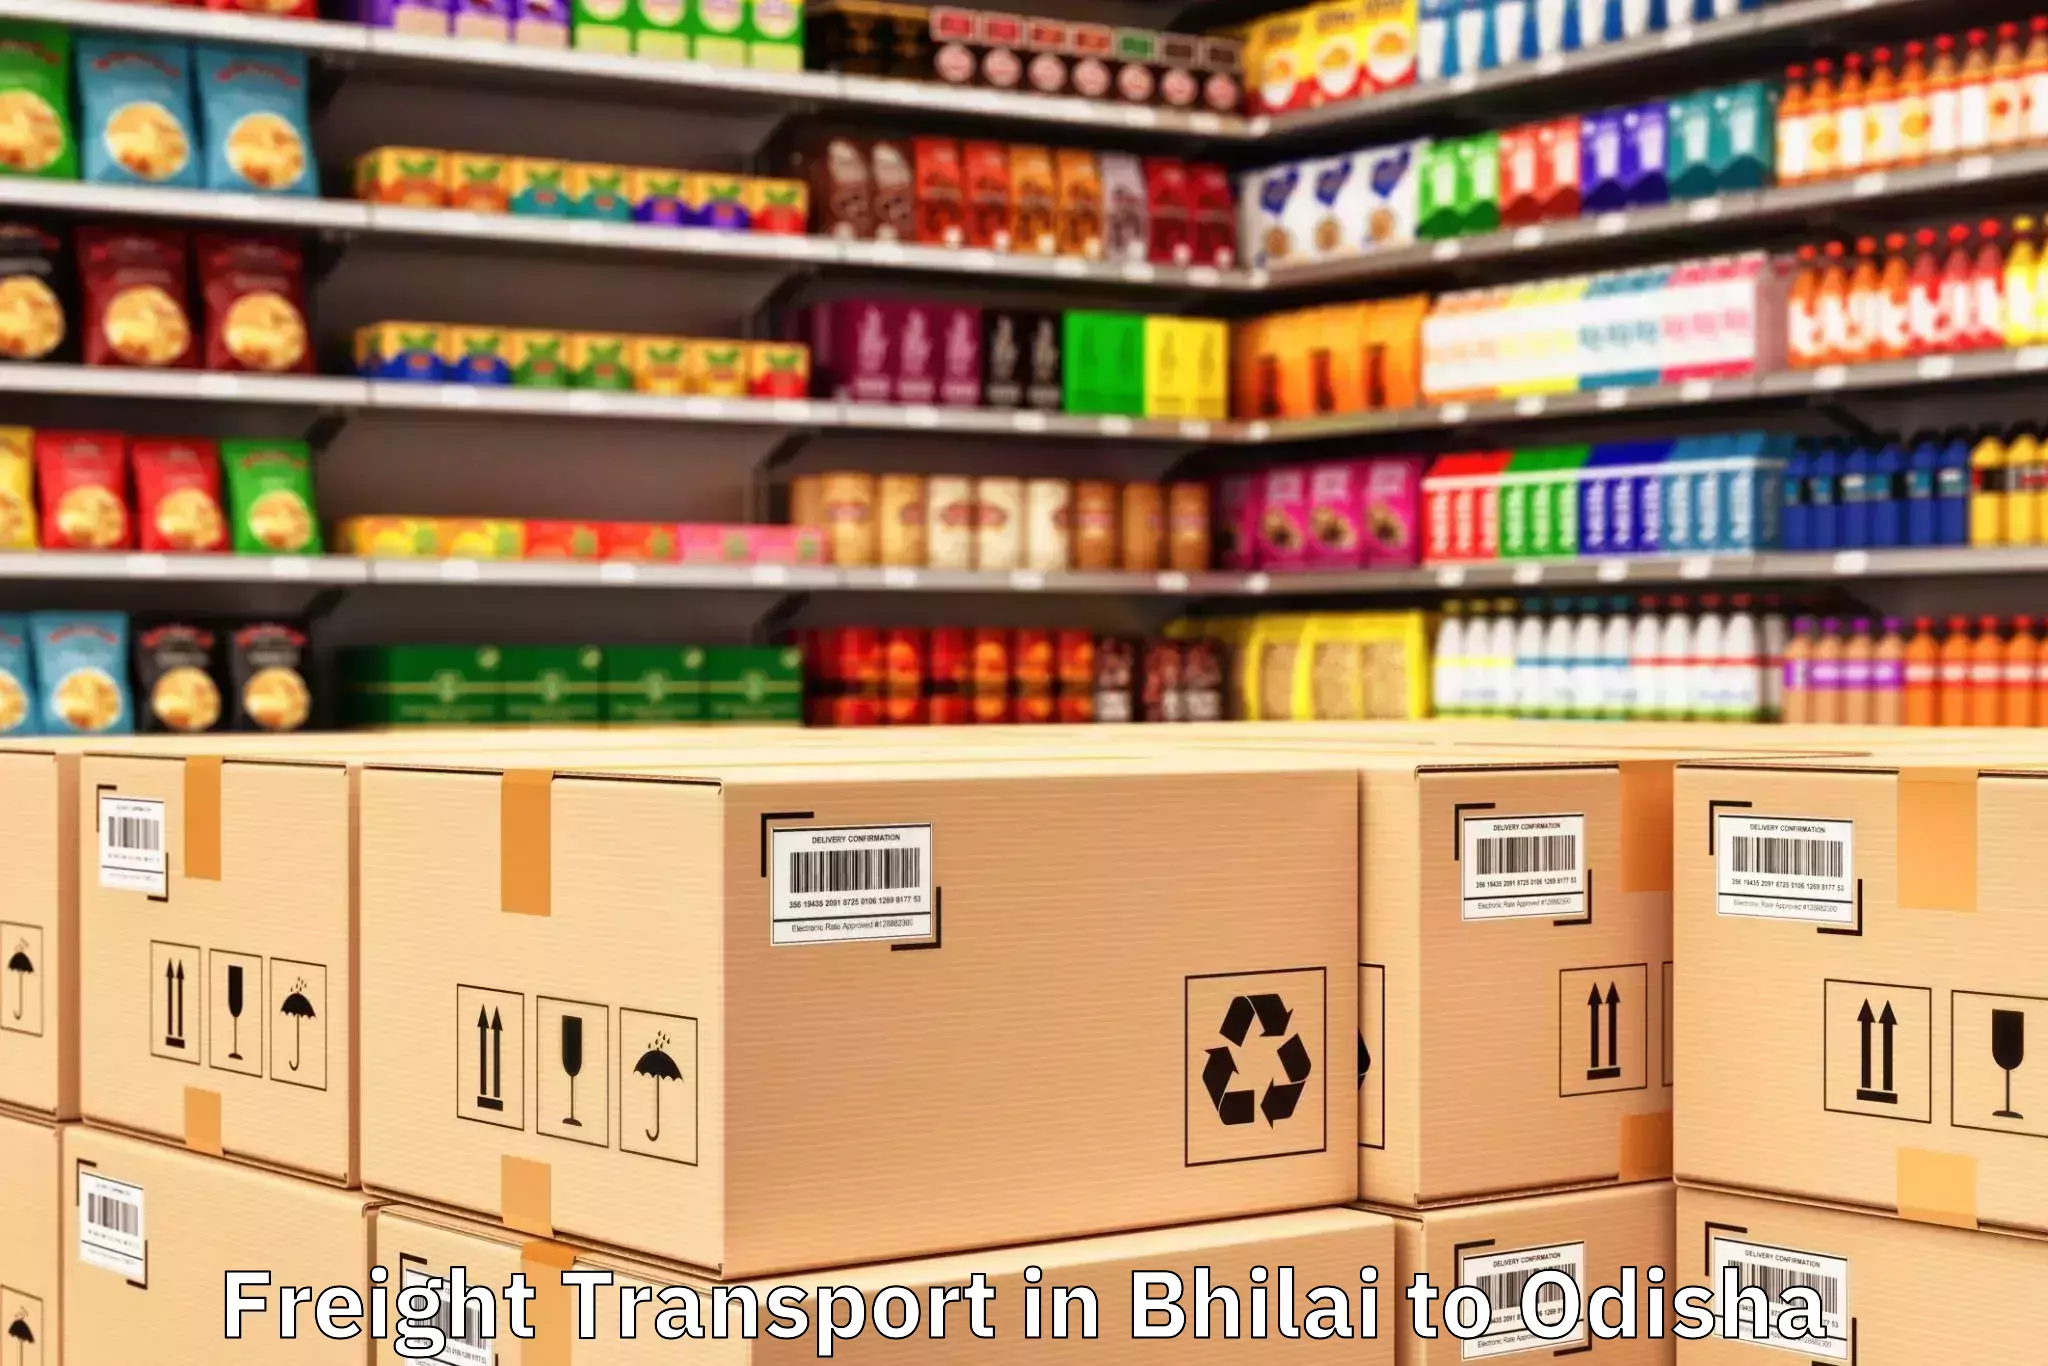 Top Bhilai to Odisha Freight Transport Available